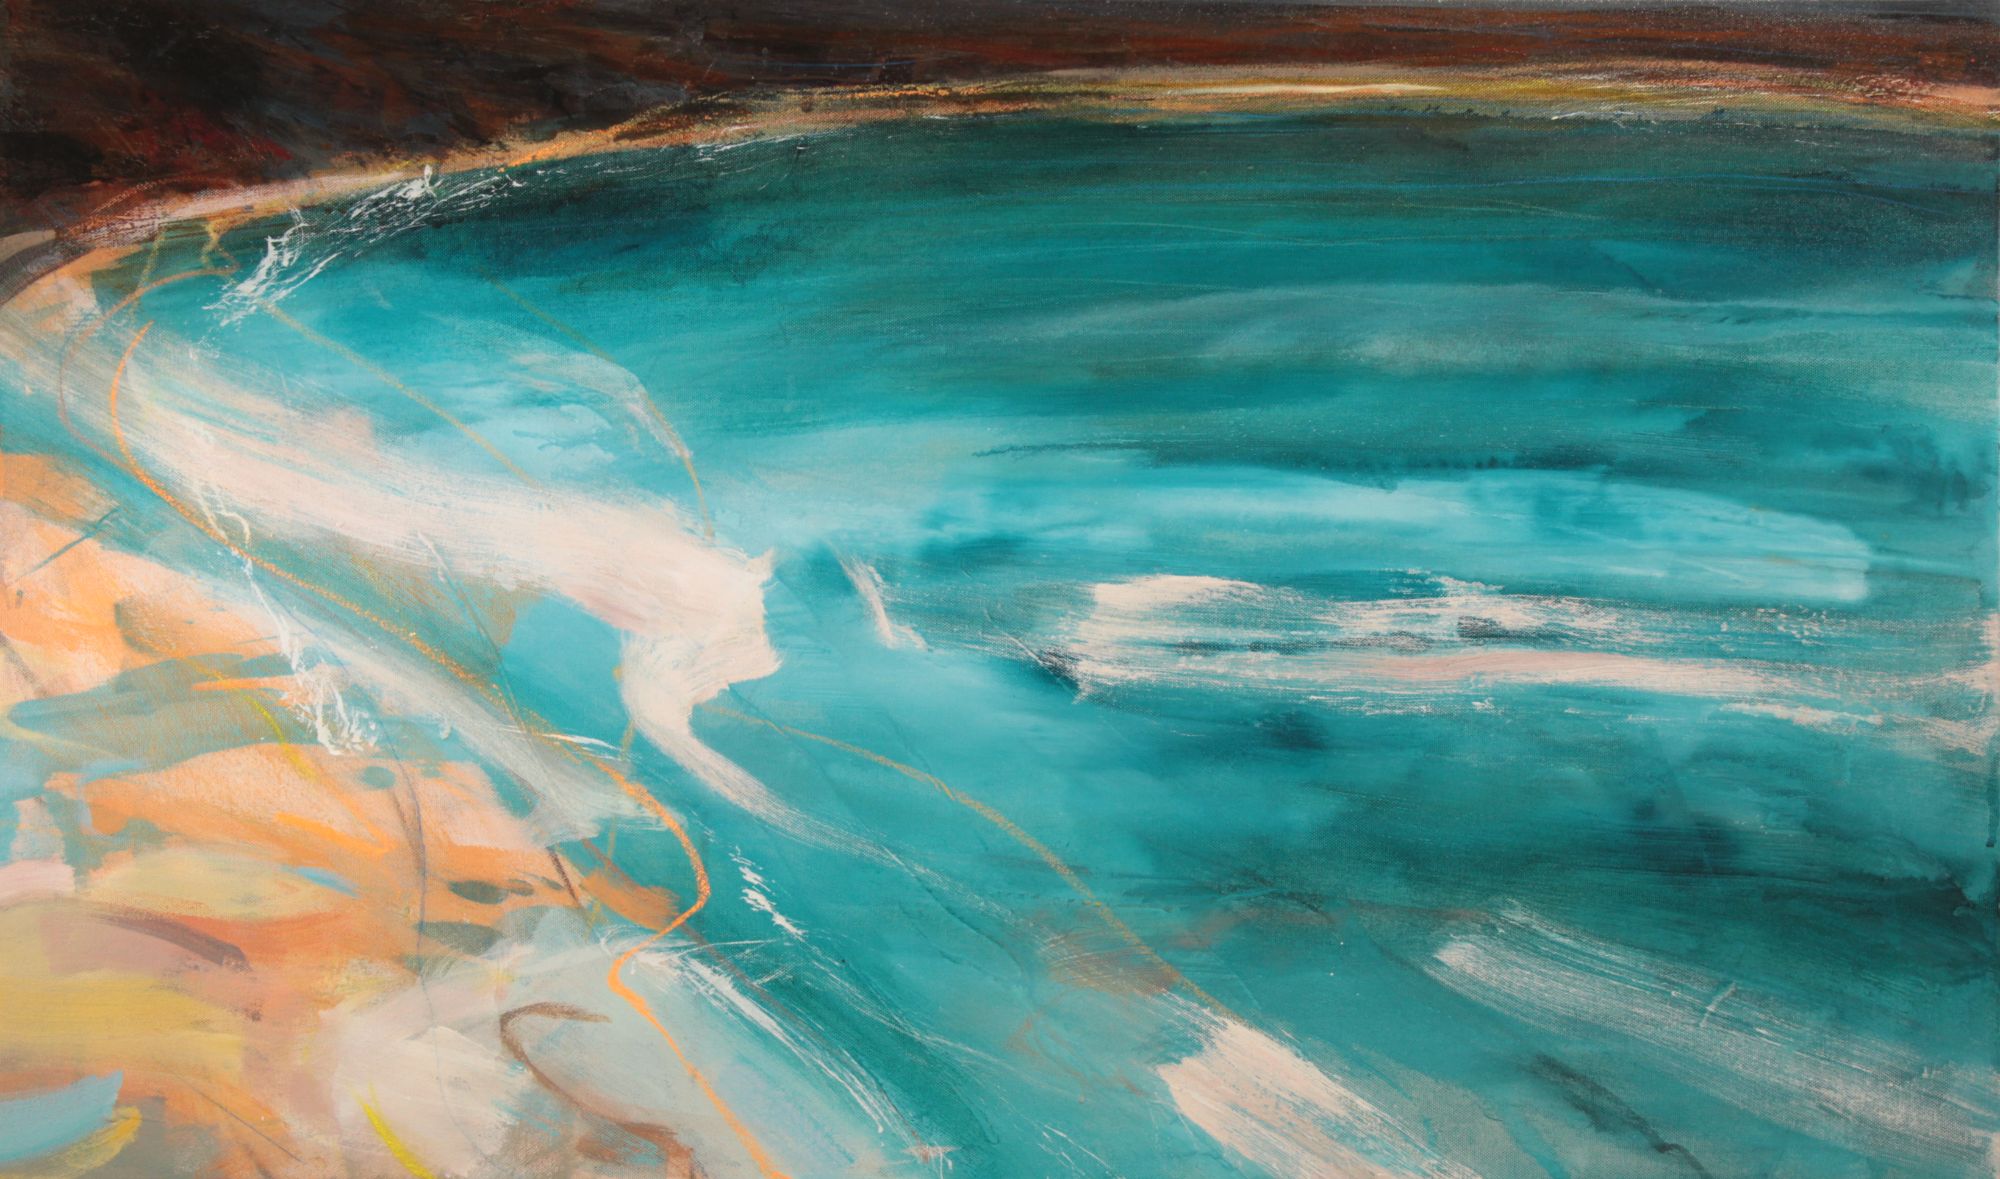 Turquoise sea with edge of land